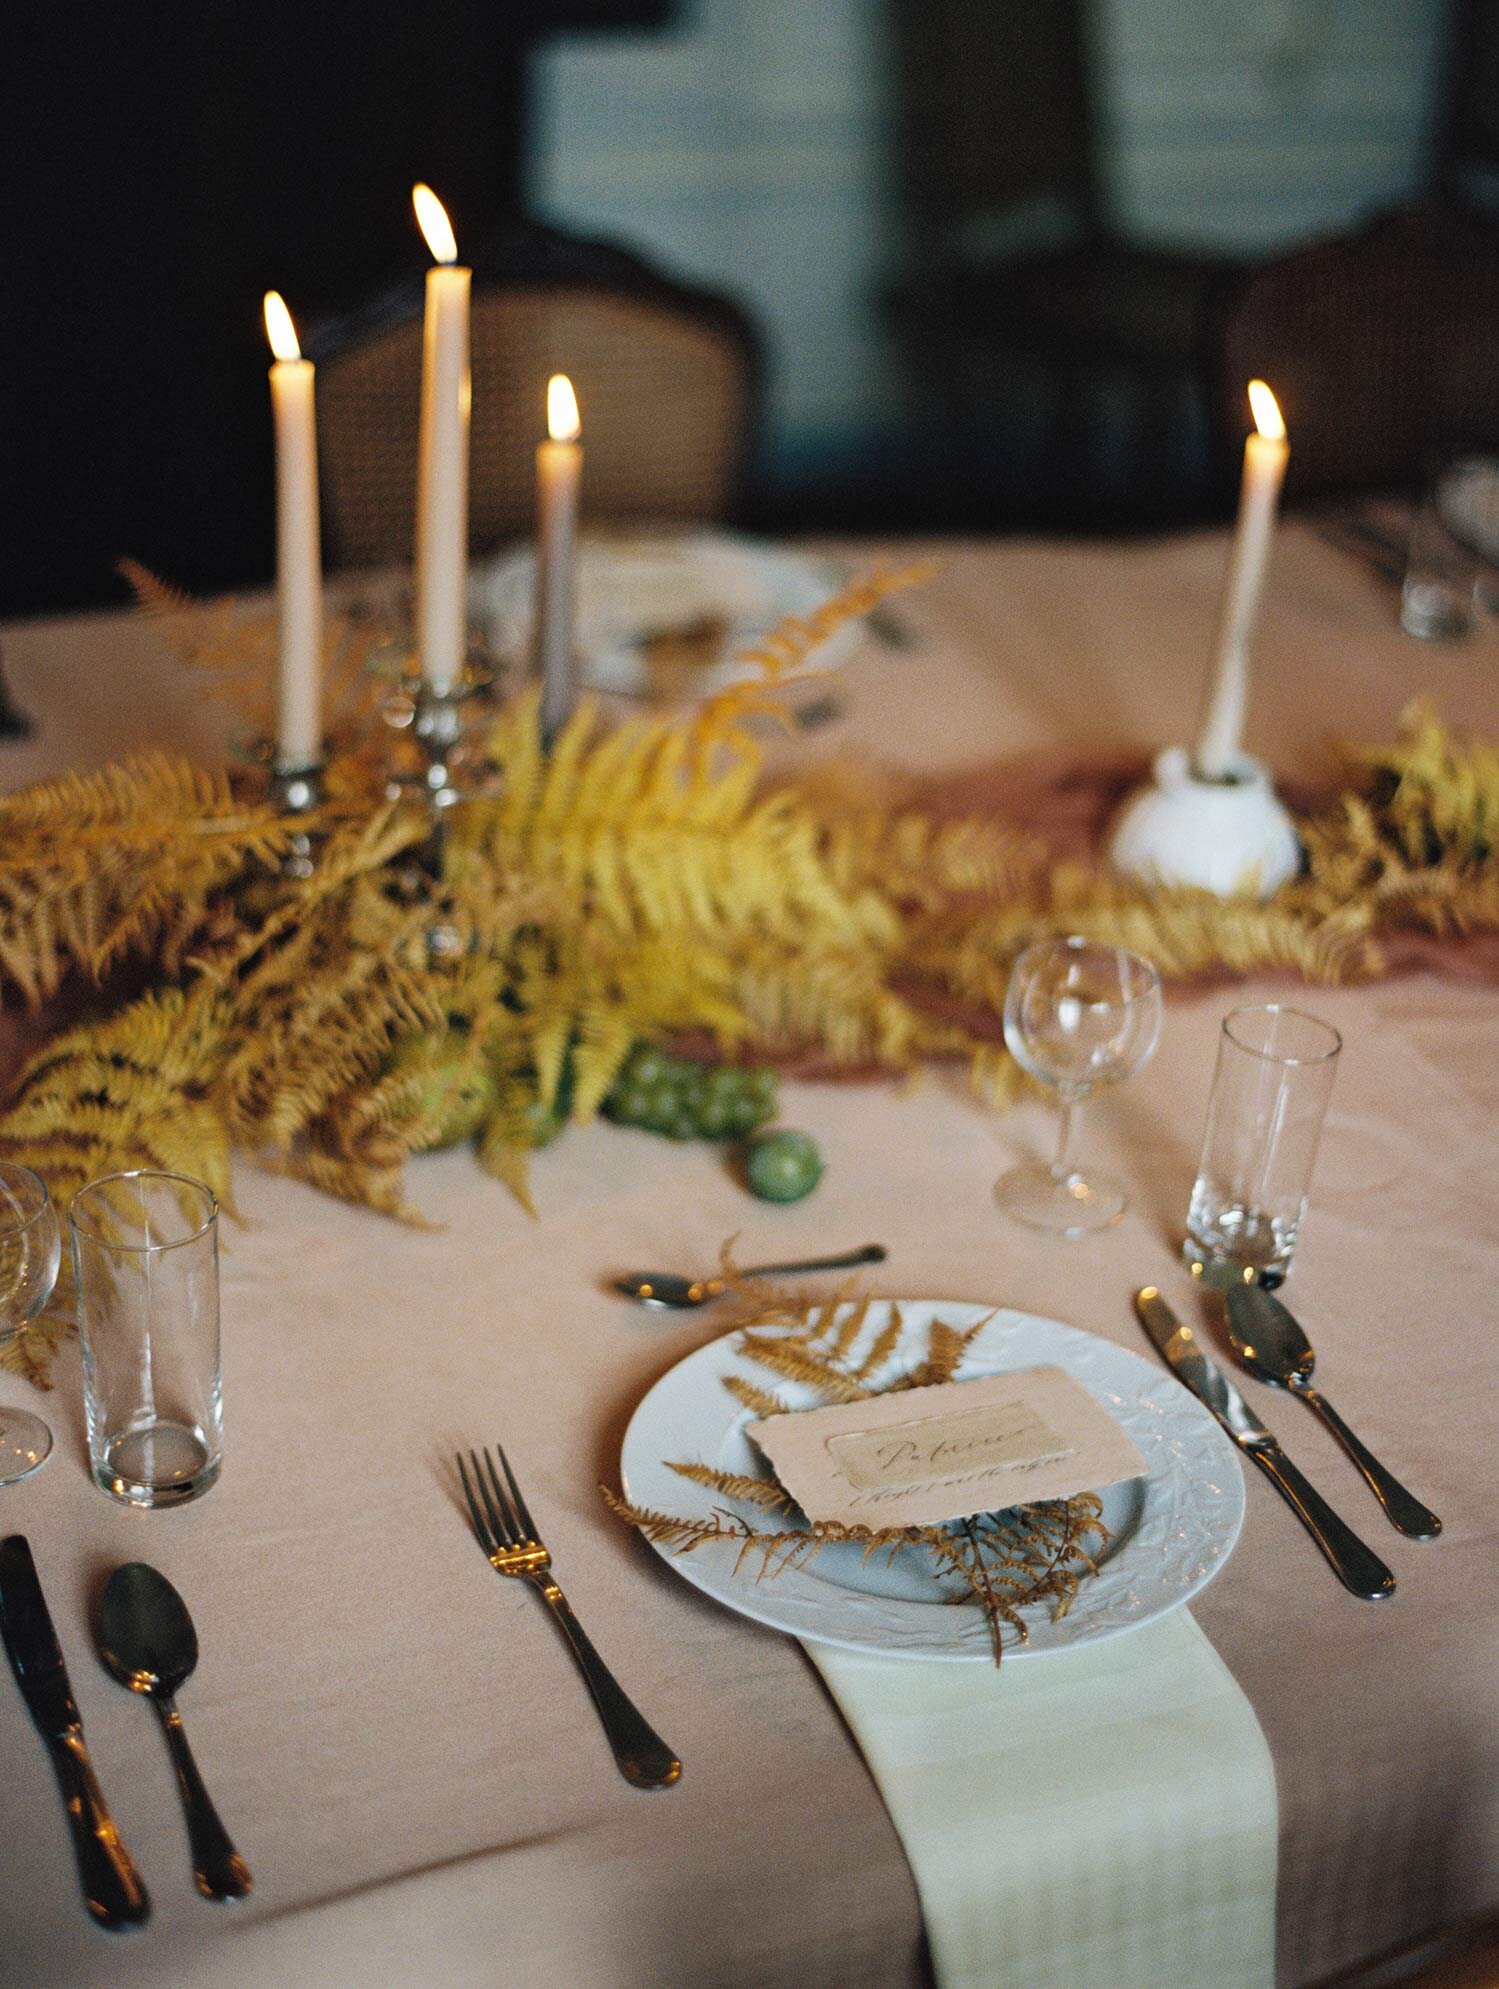 A table setting decorated with tall candles and ferns at Chateau de Courtomer, the perfect intimate french wedding venue.